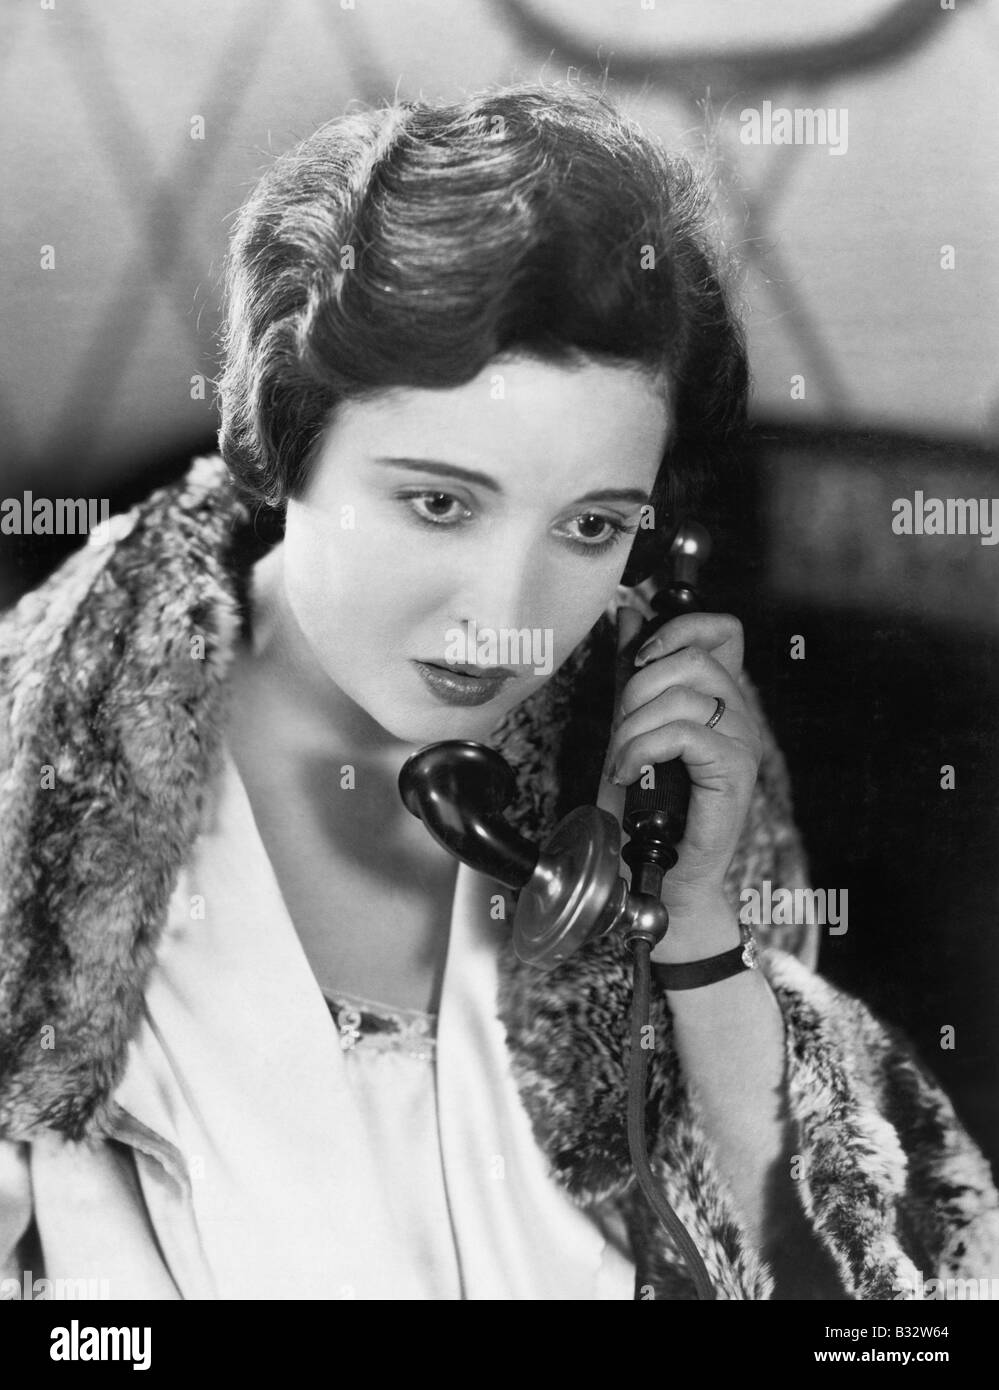 Young woman on the telephone Stock Photo